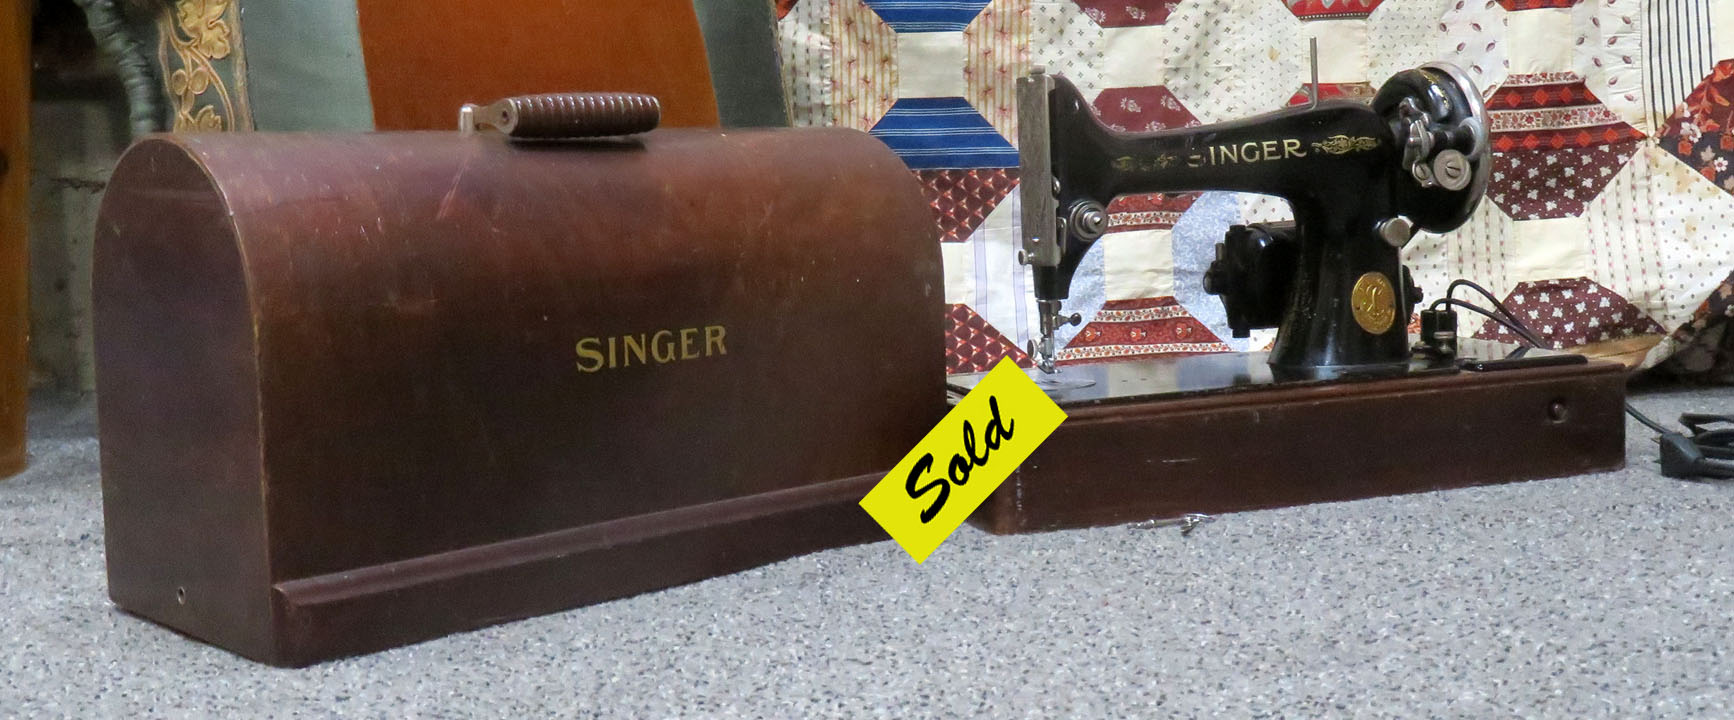 SINGER: Singer Featherweight Electric Sewing Machine